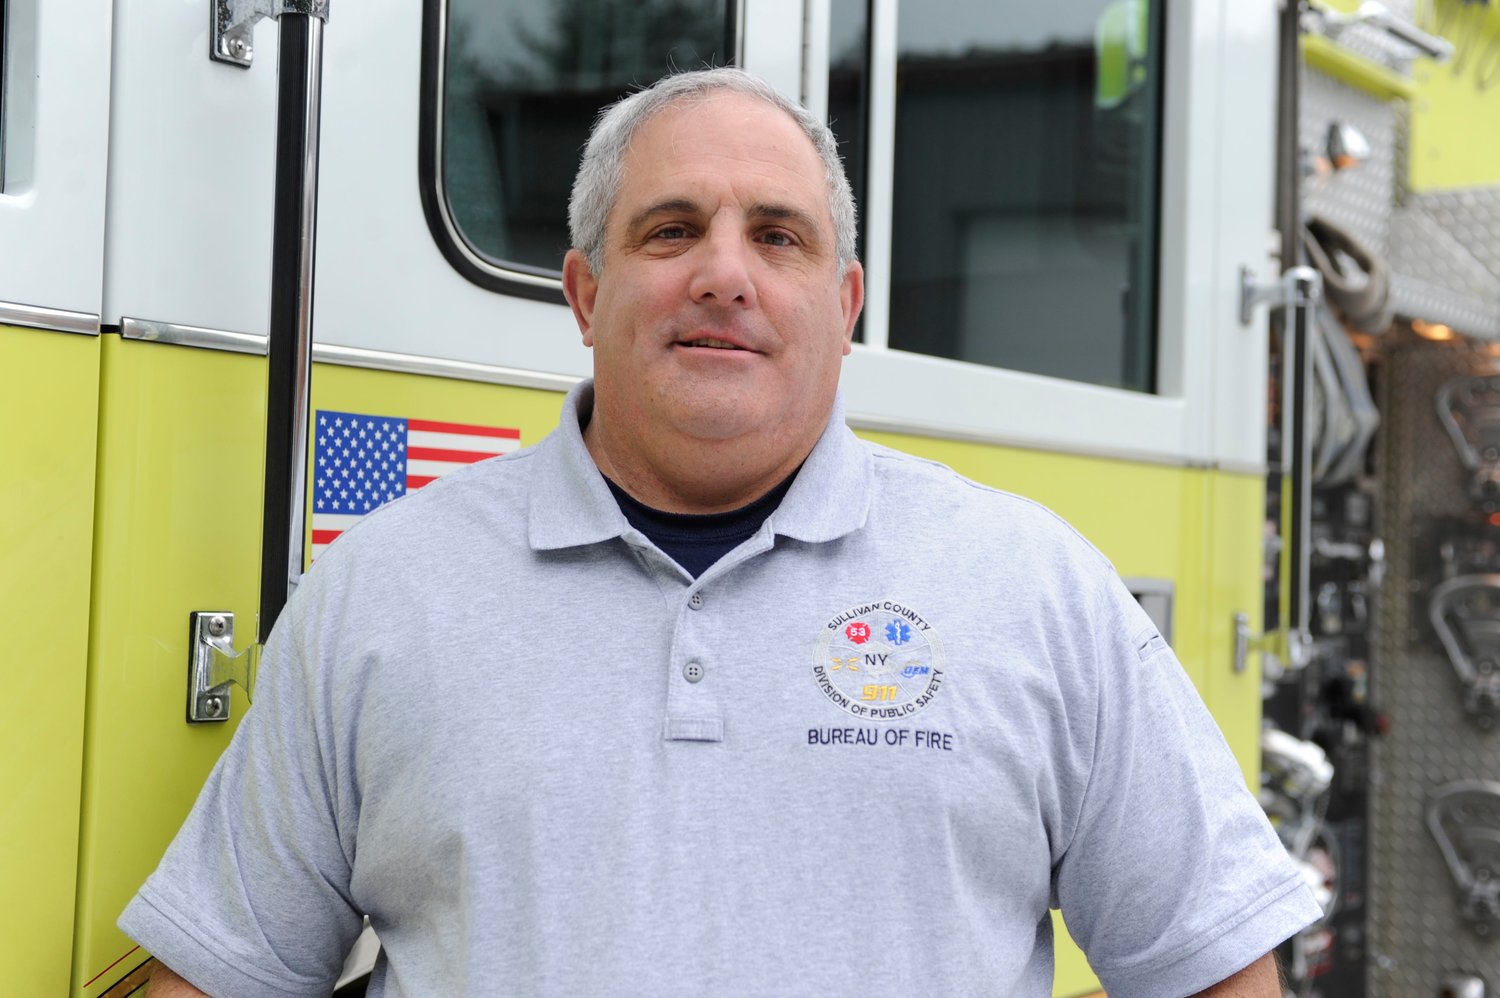 Sullivan County Fire Commissioner John Hauschild was inspired to join the fire services by his father Donald “Pop” Hauschild, who served for 56 years.